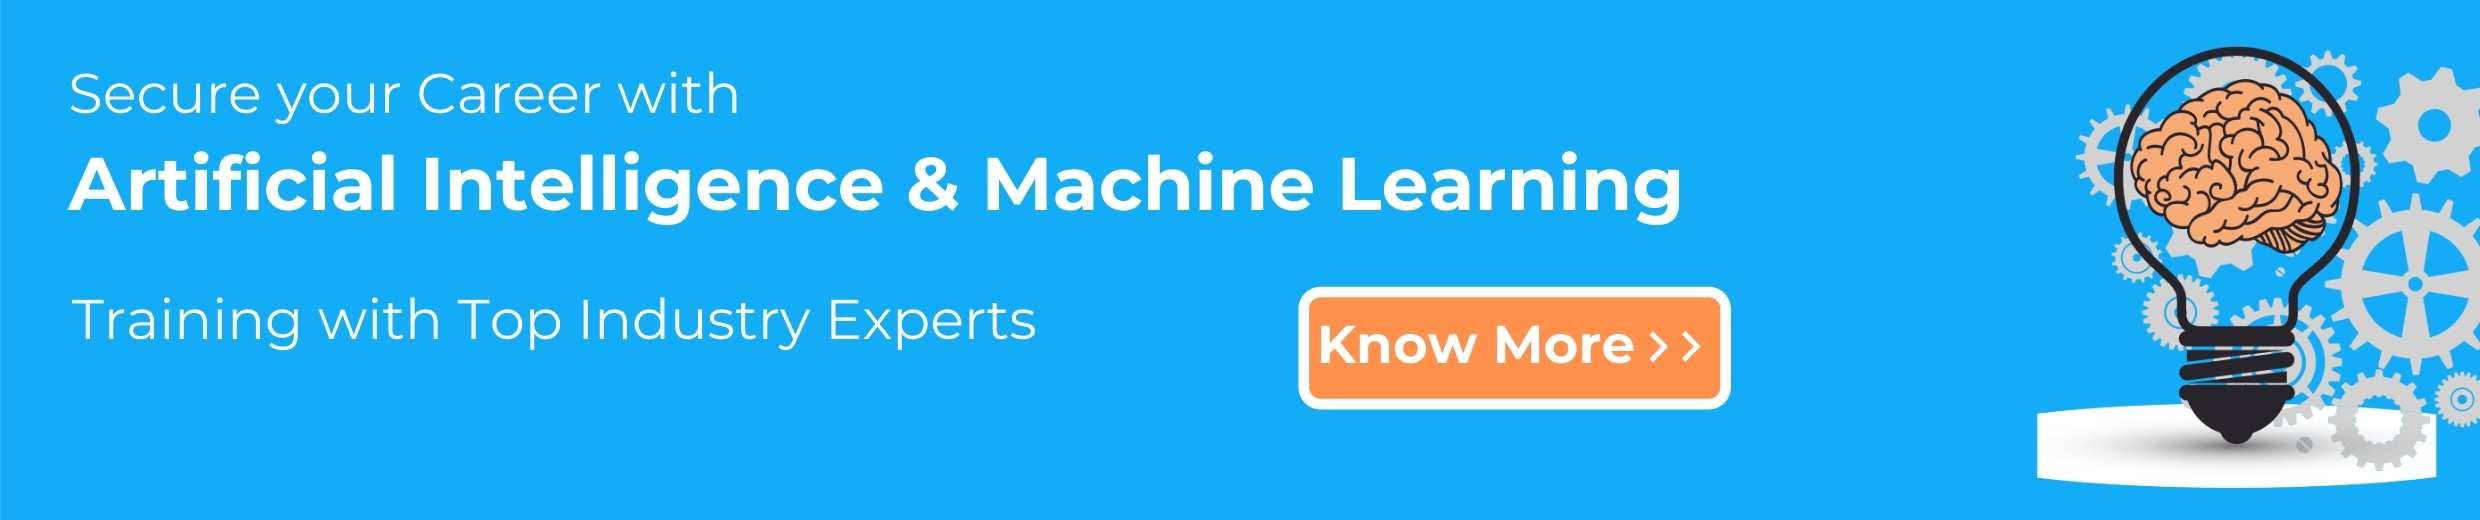 artificial-intelligence-machine-learning-training